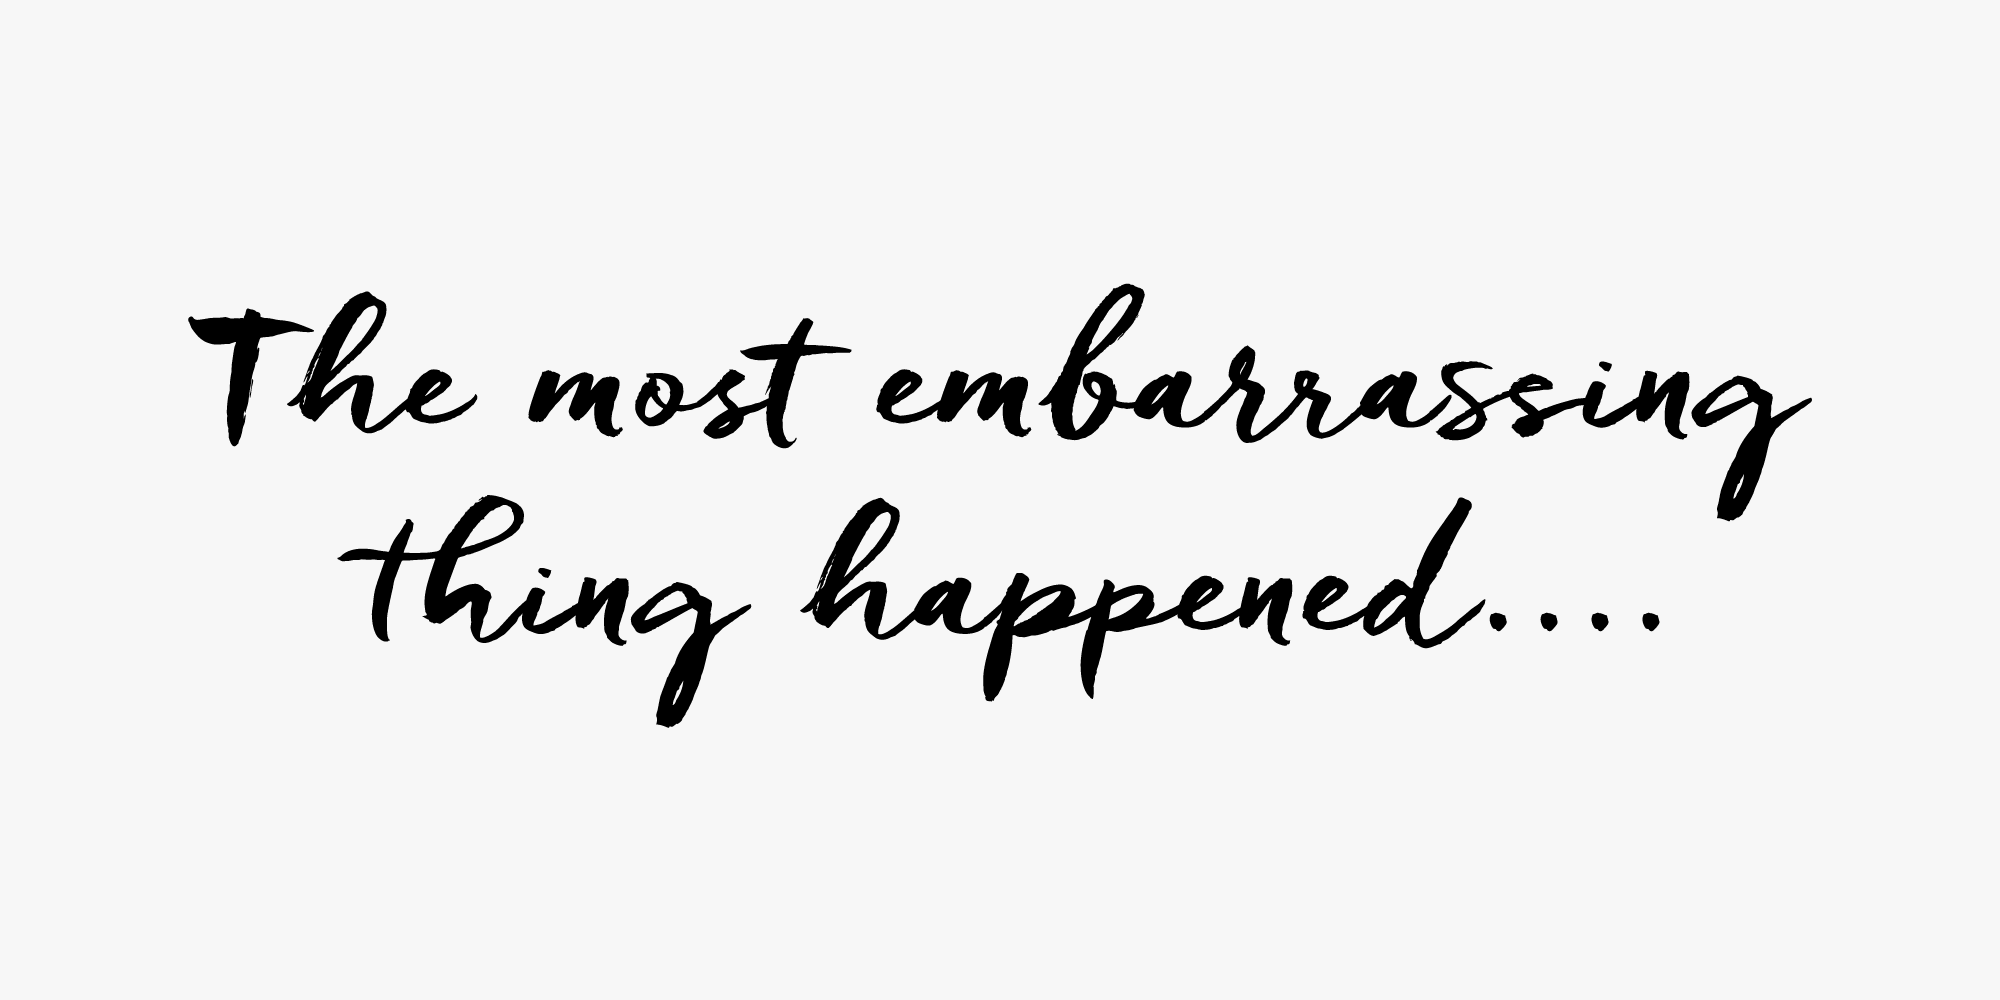 Dear Diary Entry 1 – The most embarrassing thing happened via @GirlWithCurves